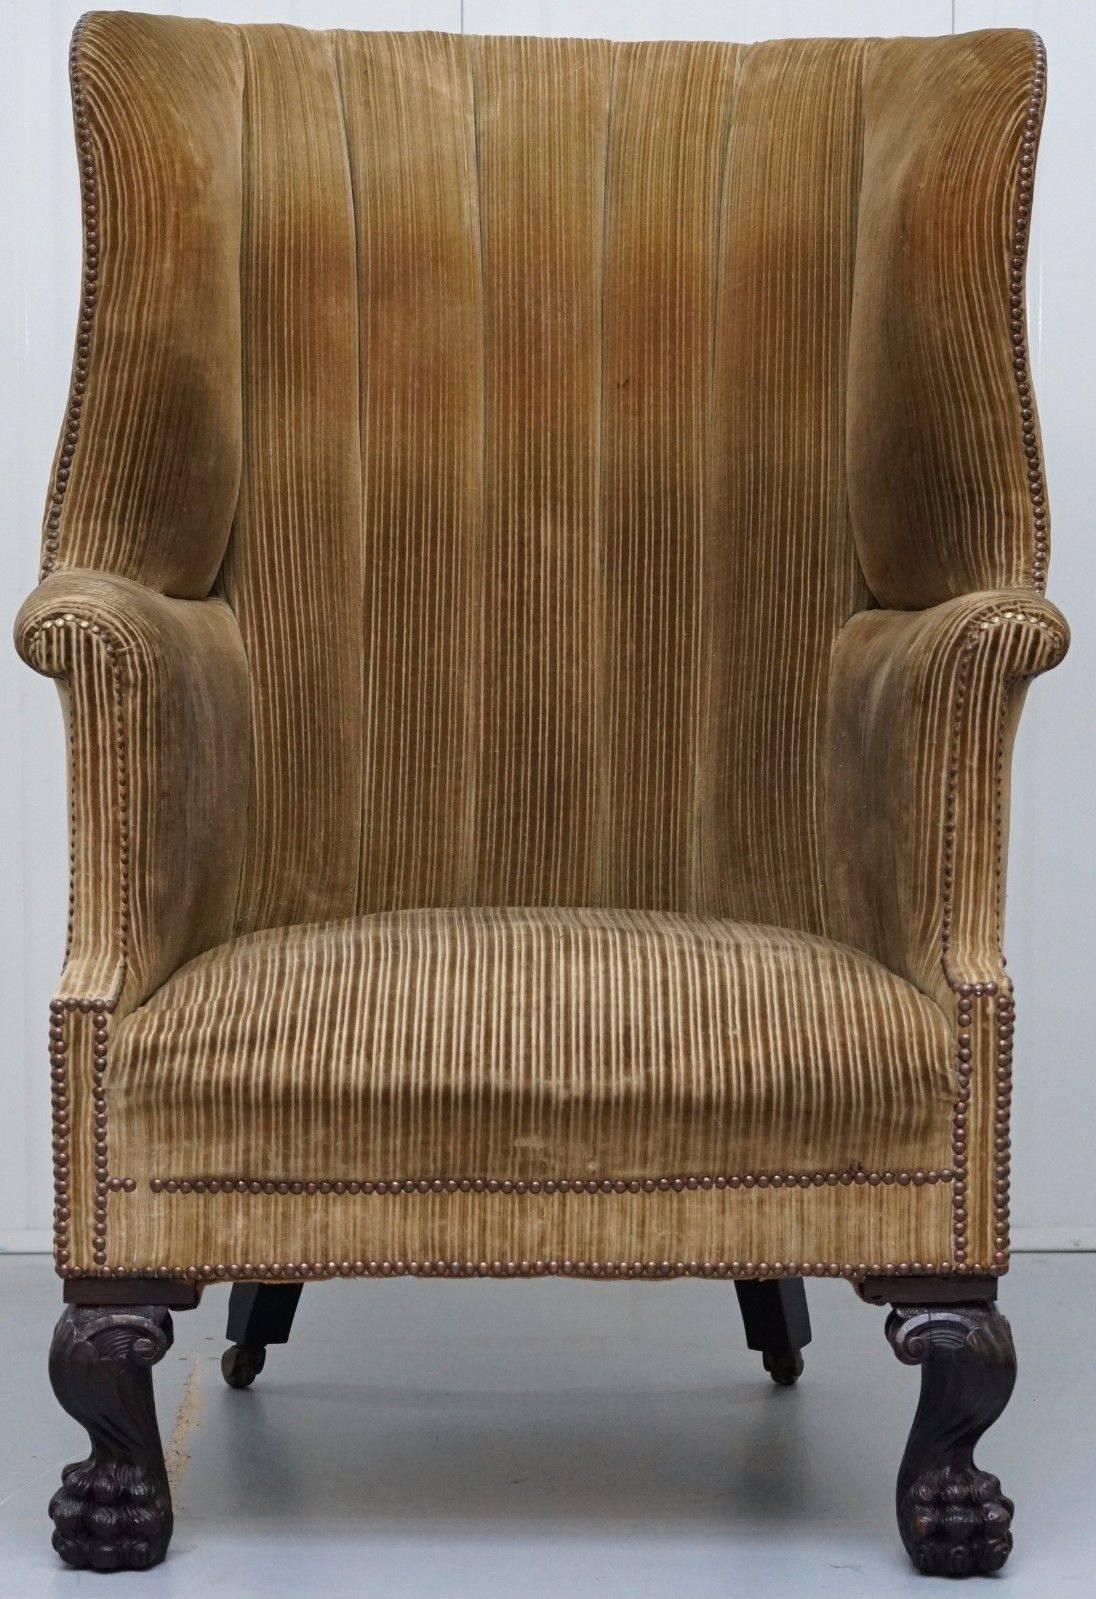 We are delighted to offer for sale this very rare 18th century King George II Lion hair paw carved wood barrel back armchair

Please note the delivery fee quoted is just a guide, for an accurate quote please send me your postcode 

A large and